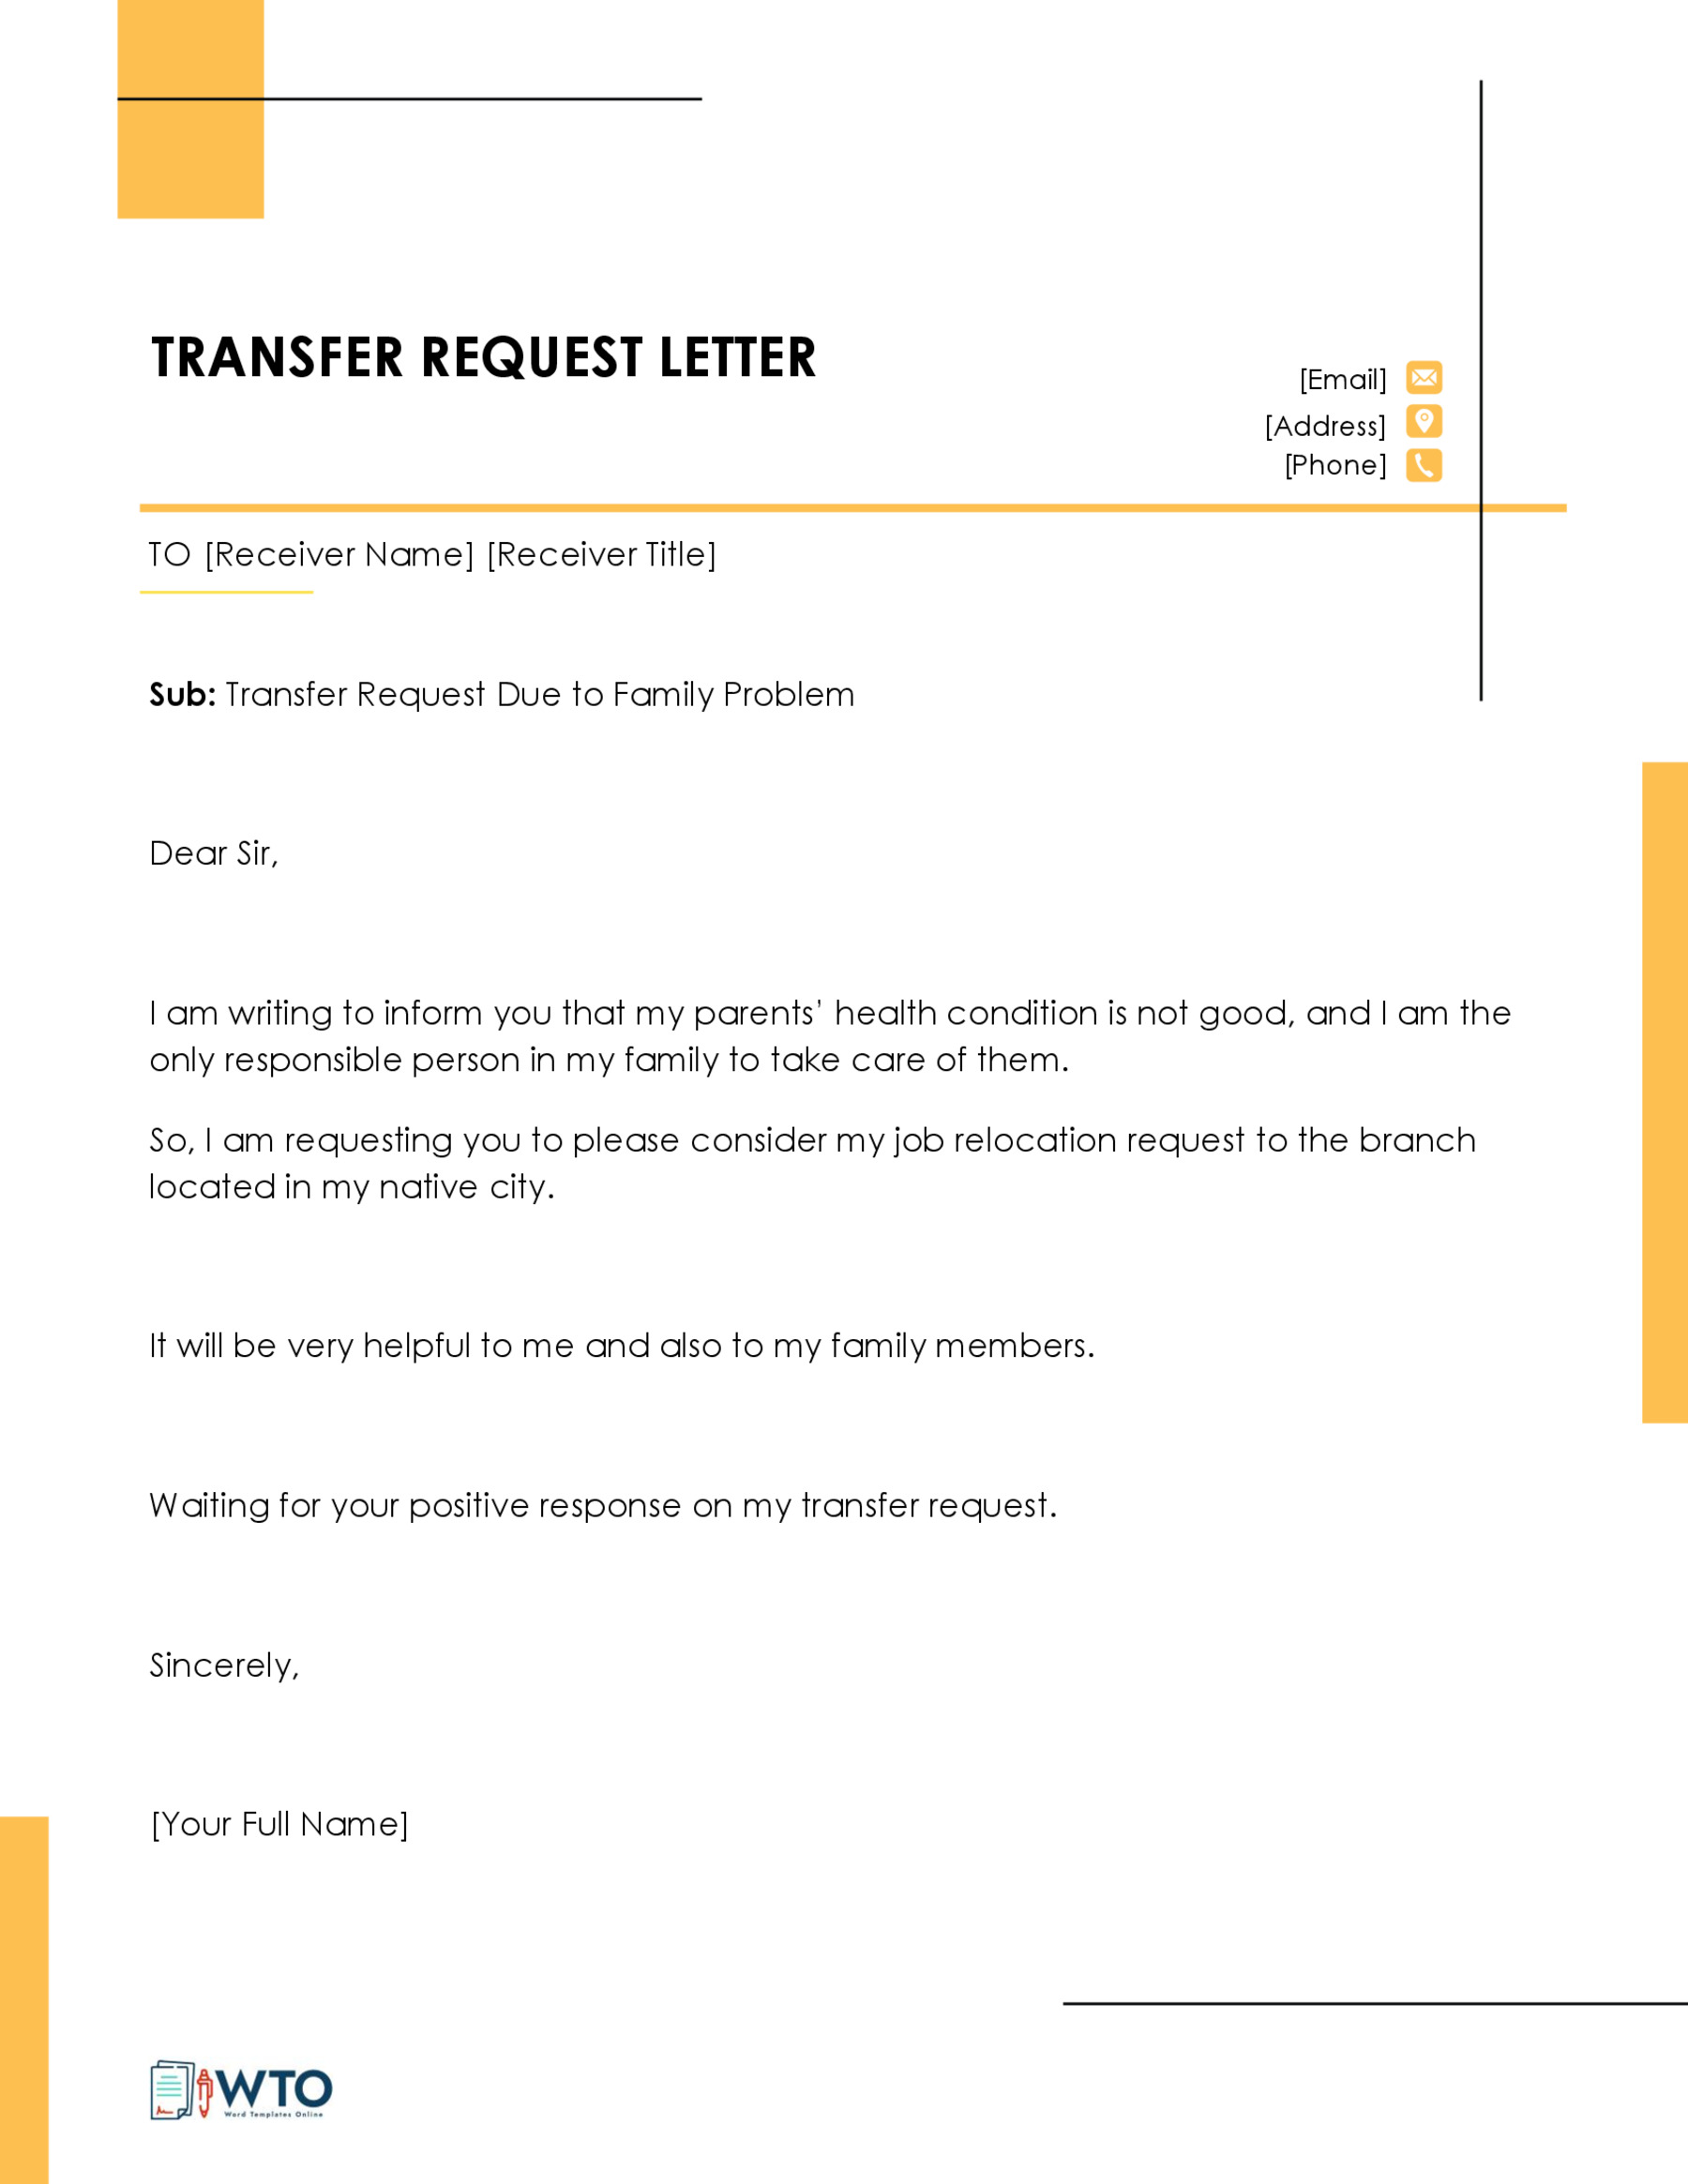 Free Downloadable Transfer Request Letter Sample 01 as Word File